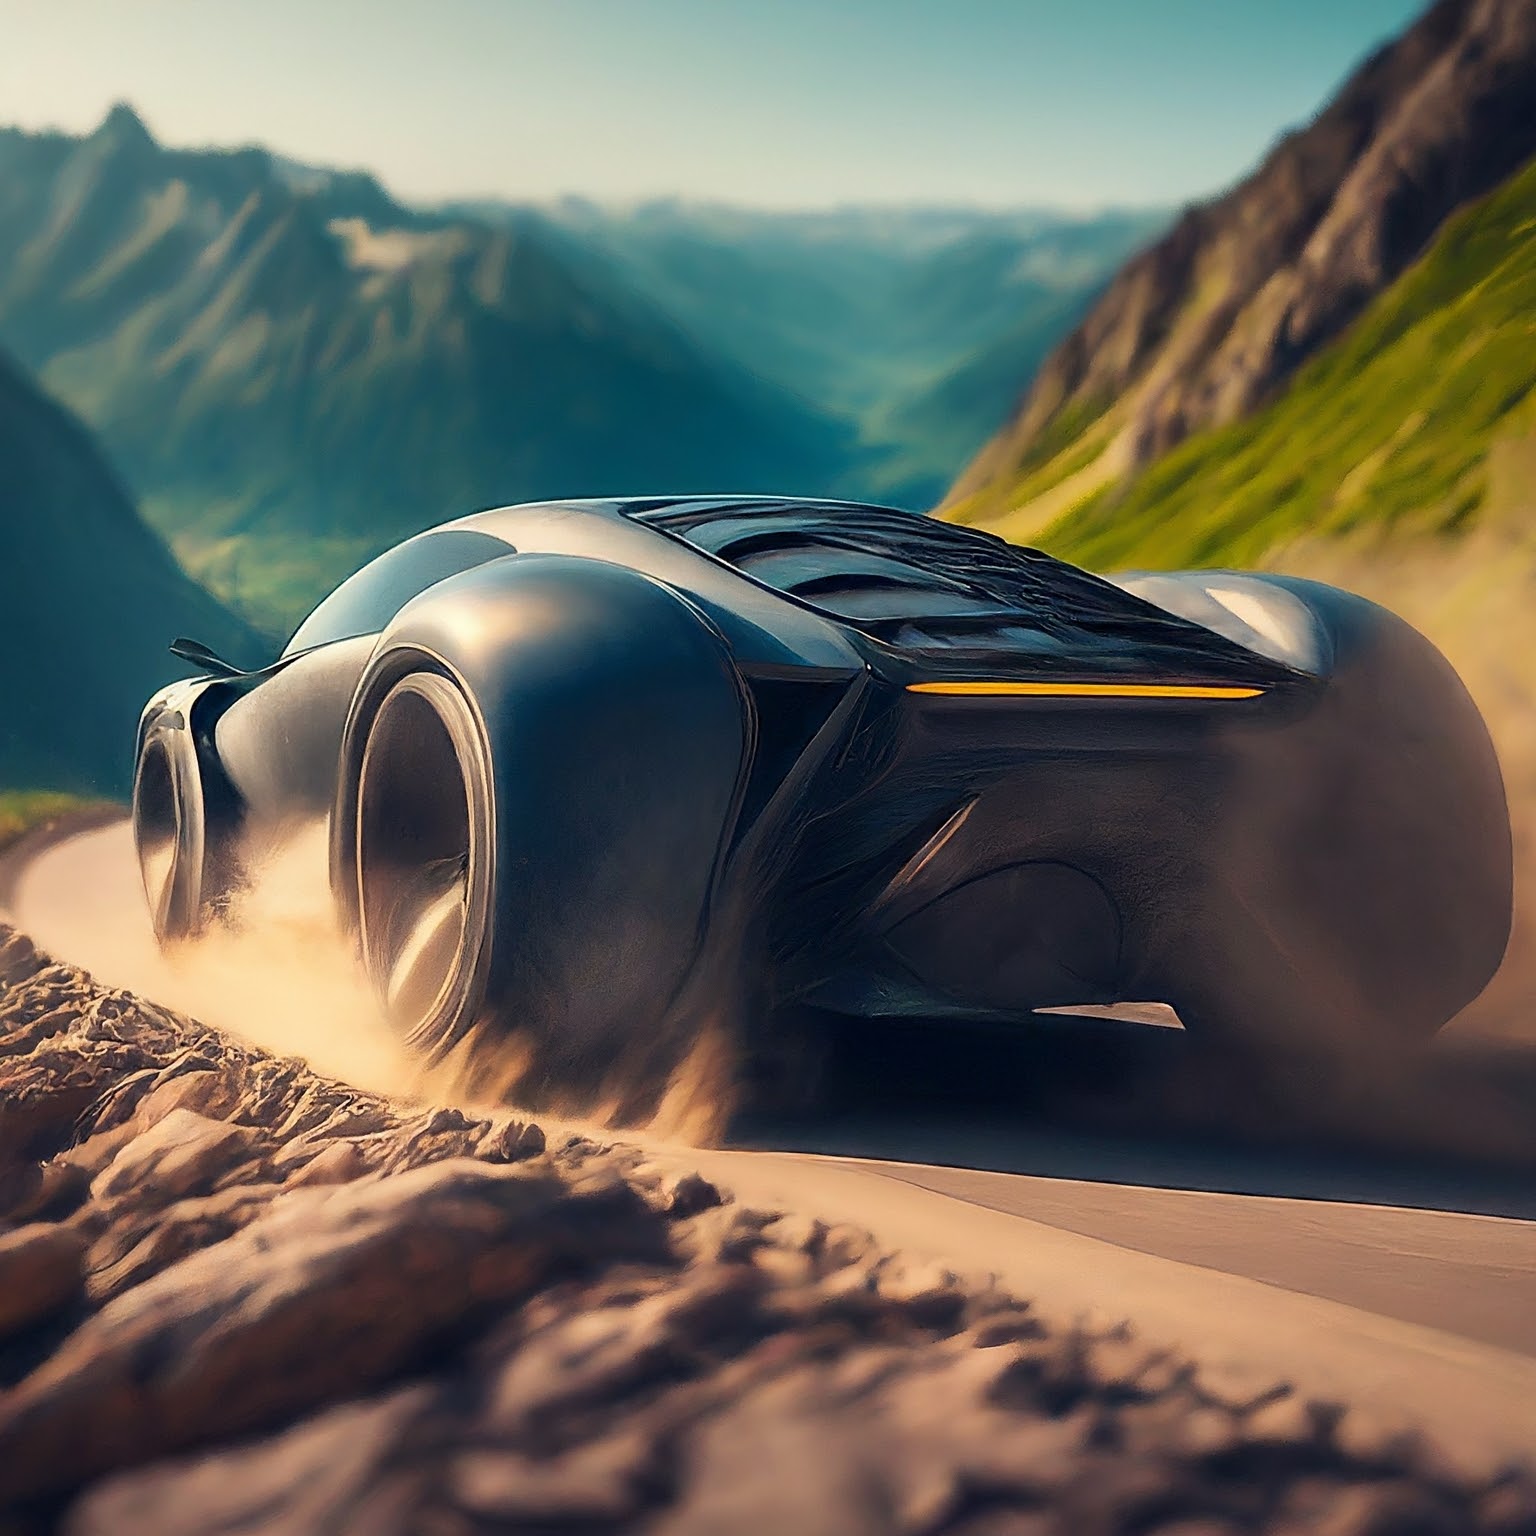 A futuristic automobile driving on a dirt road through the mountains 